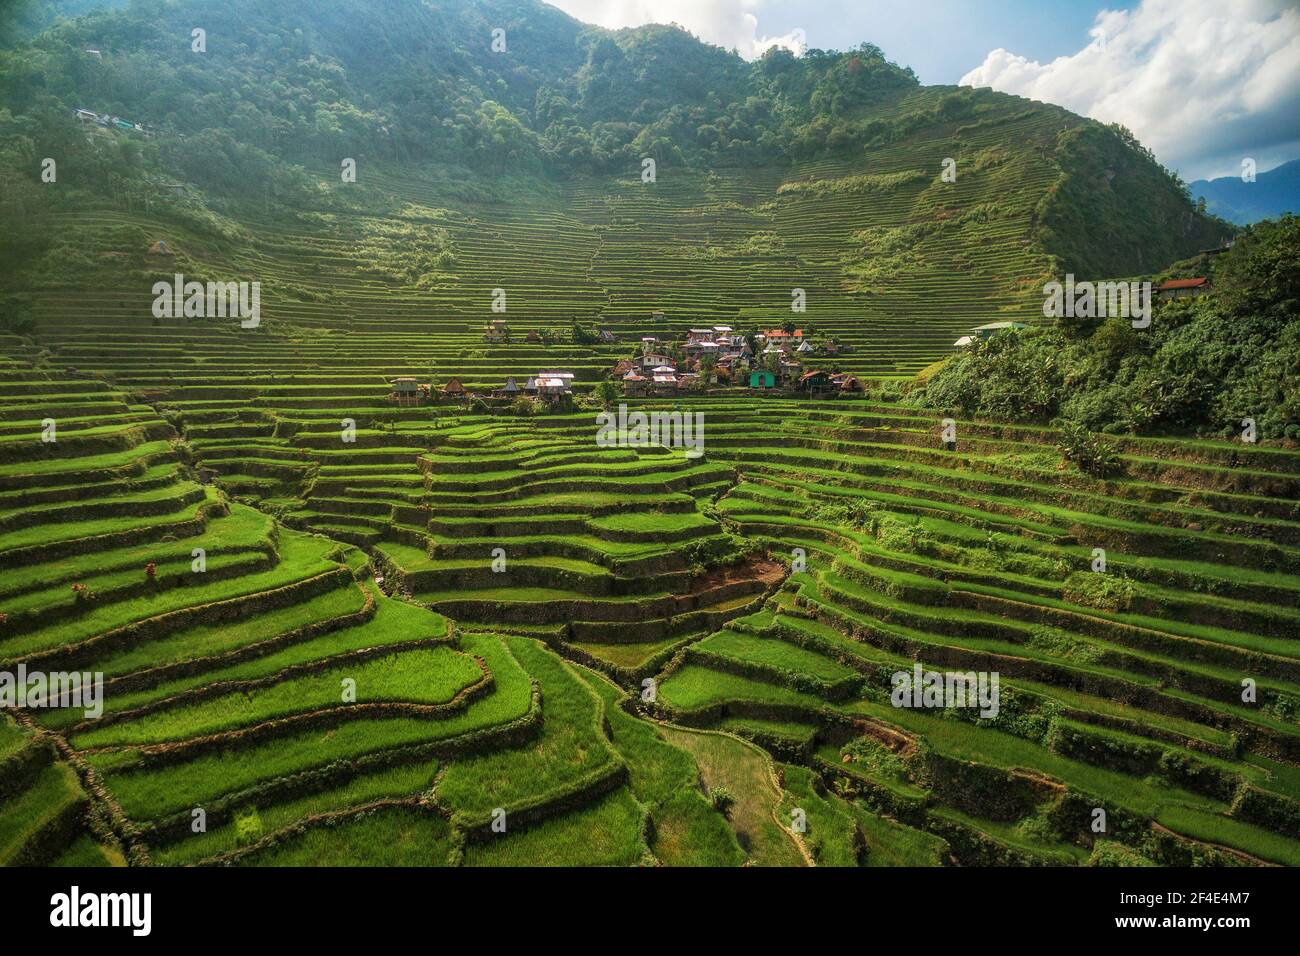 Aerial view of Batad rice terraces in northern Luzon, Philippines. Stock Photo